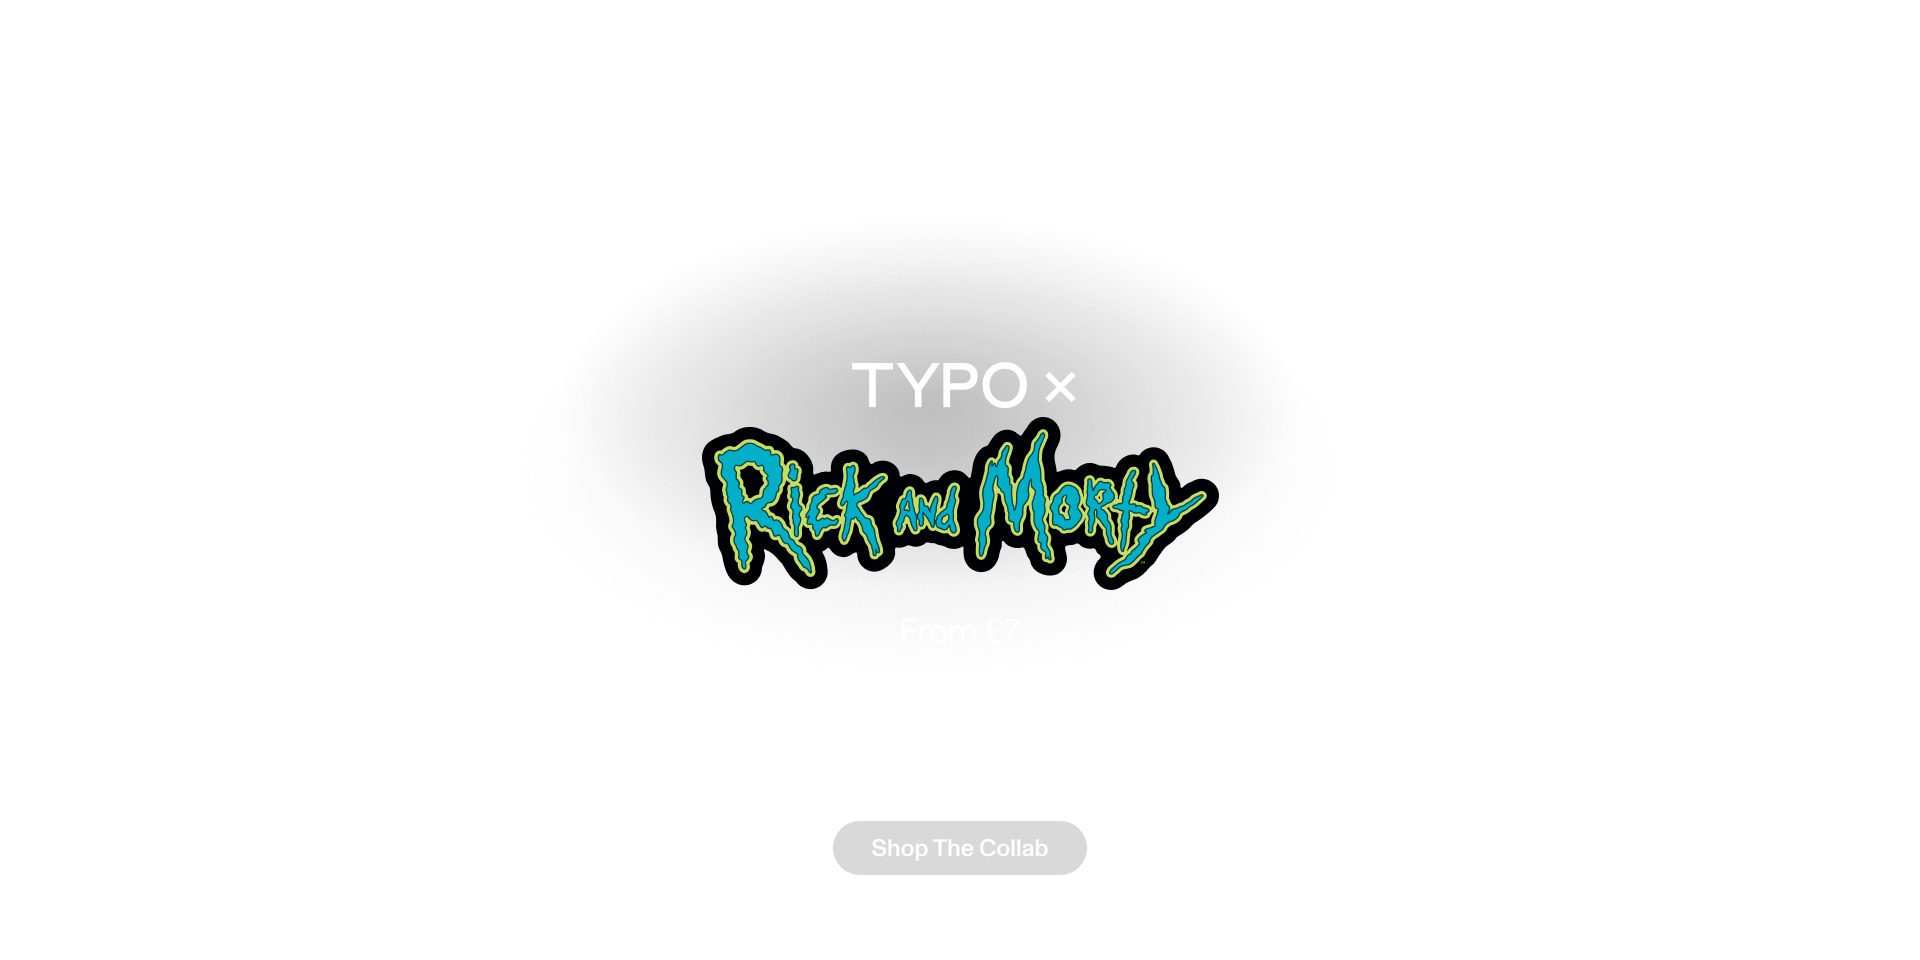 Typo x Rick And Morty. From £7. Shop The Collab.